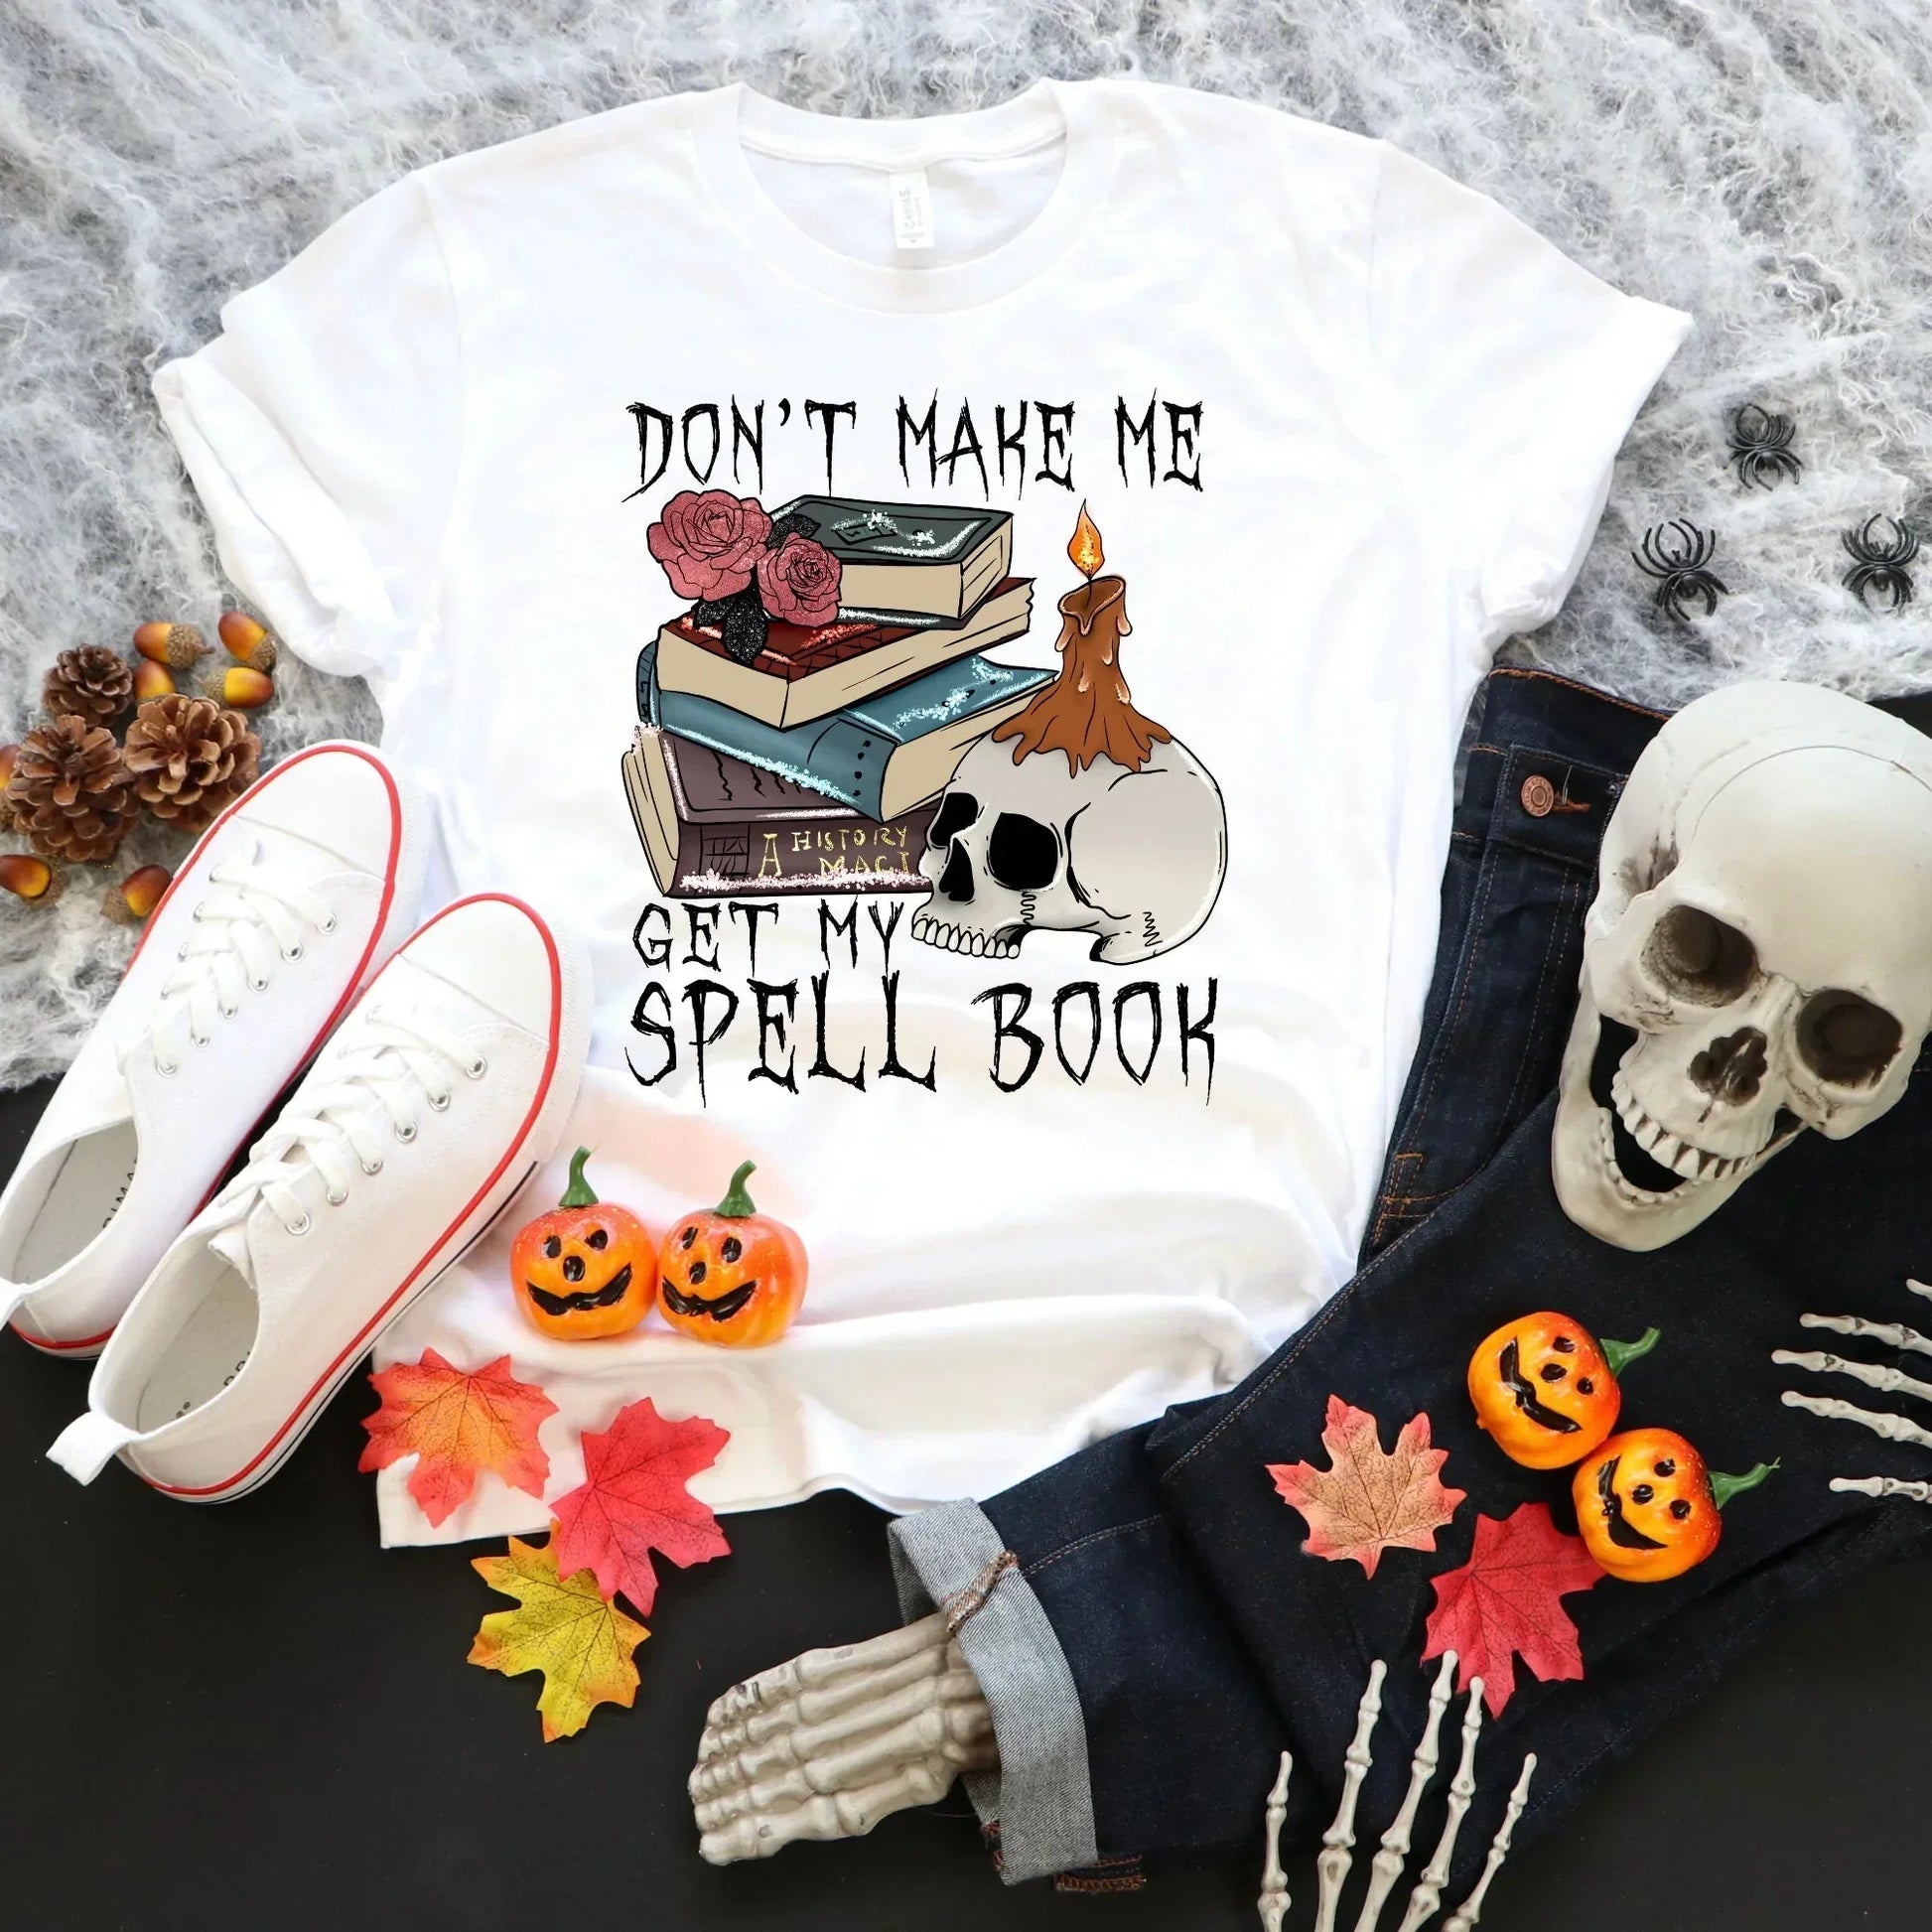 Pastel Halloween Gothic Shirt, Witchy Vibes, Halloween Sweatshirt, Skull Shirt, Pastel Goth Style Grunge Aesthetic Clothing, Witch Sweater HMDesignStudioUS